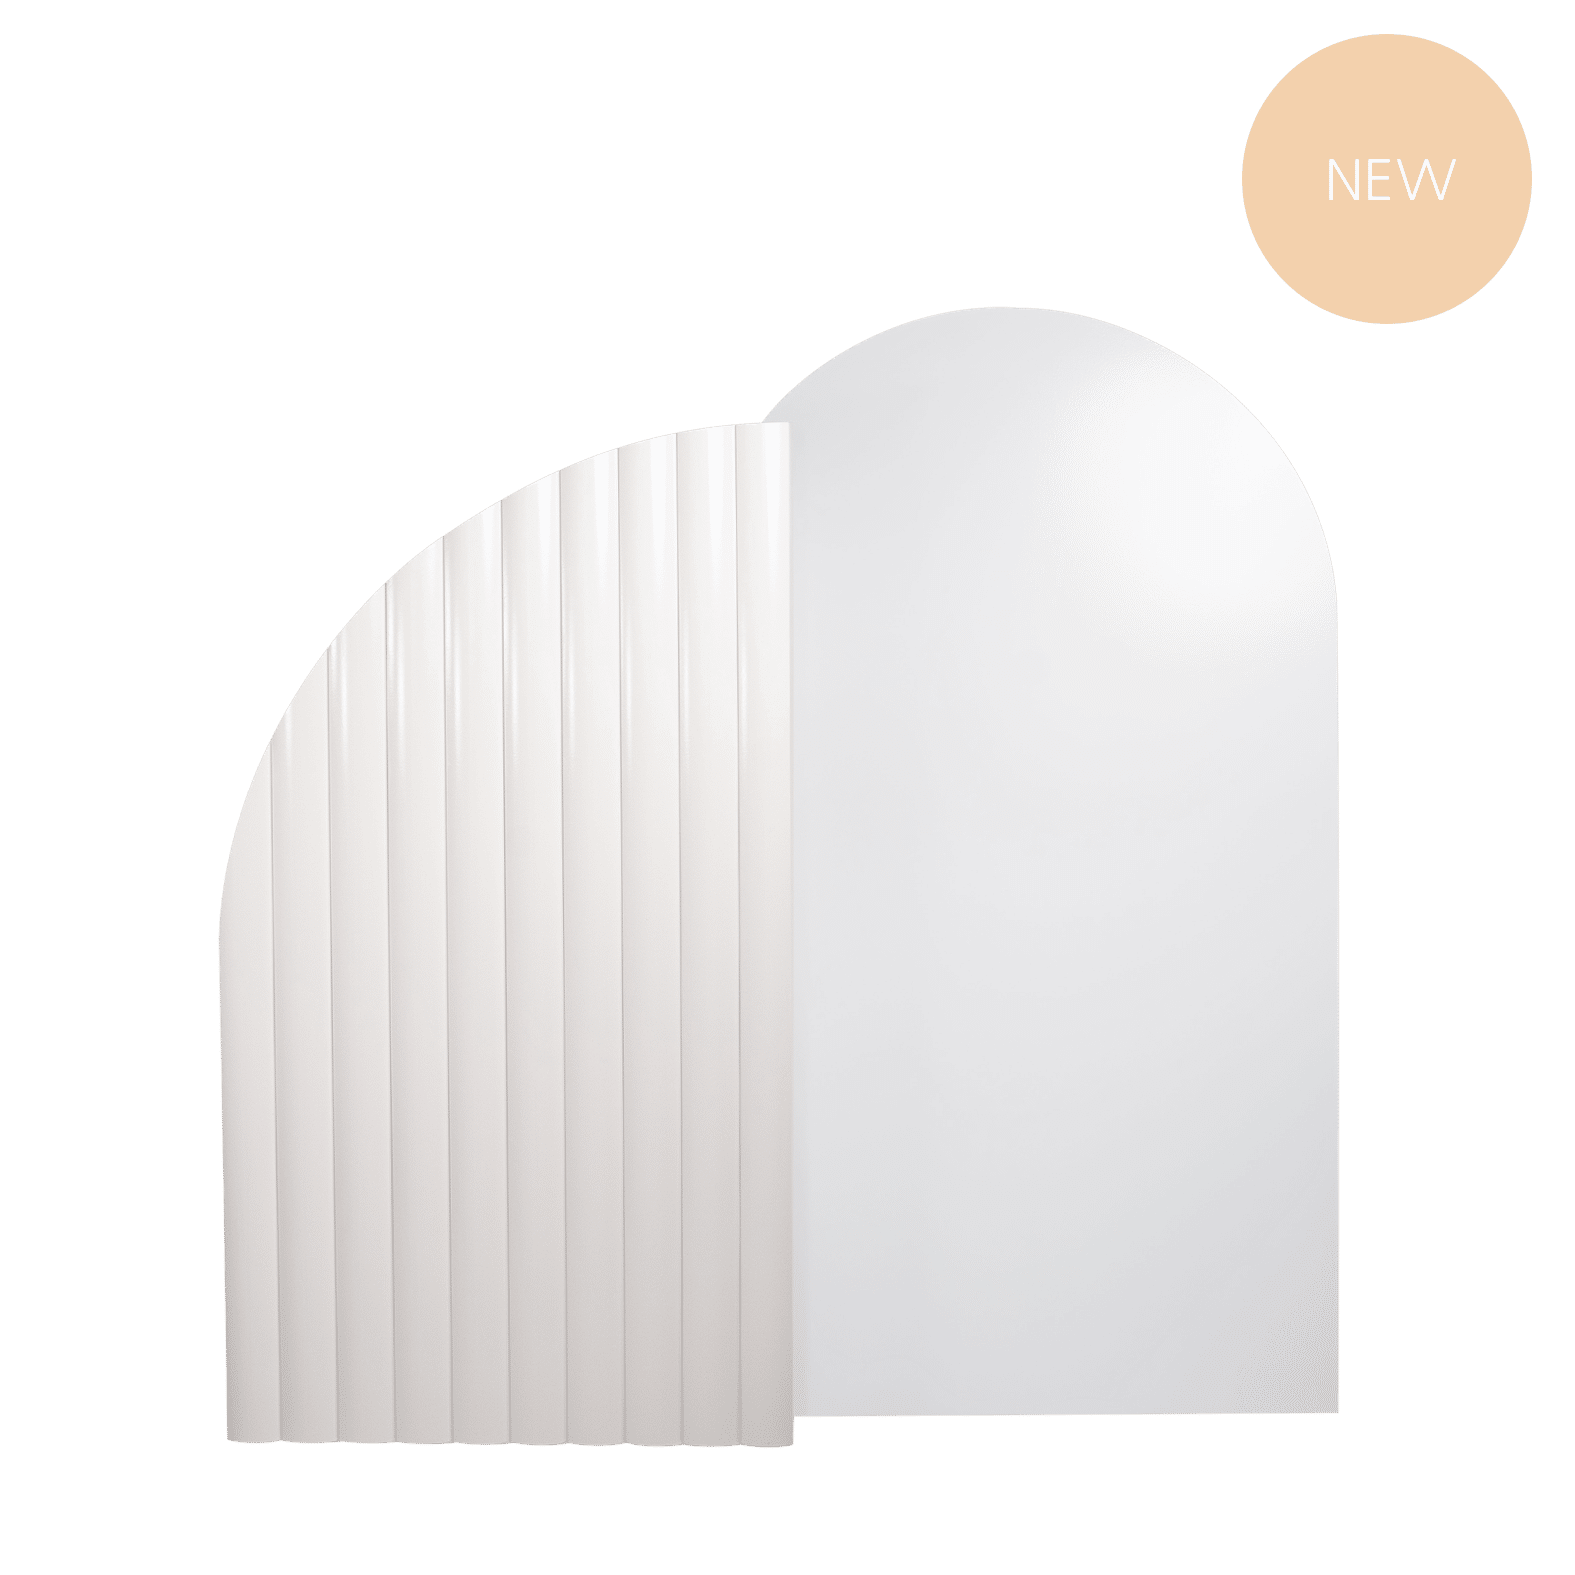 Arch Backdrop LARGE DUO - Cream Textured & White_New